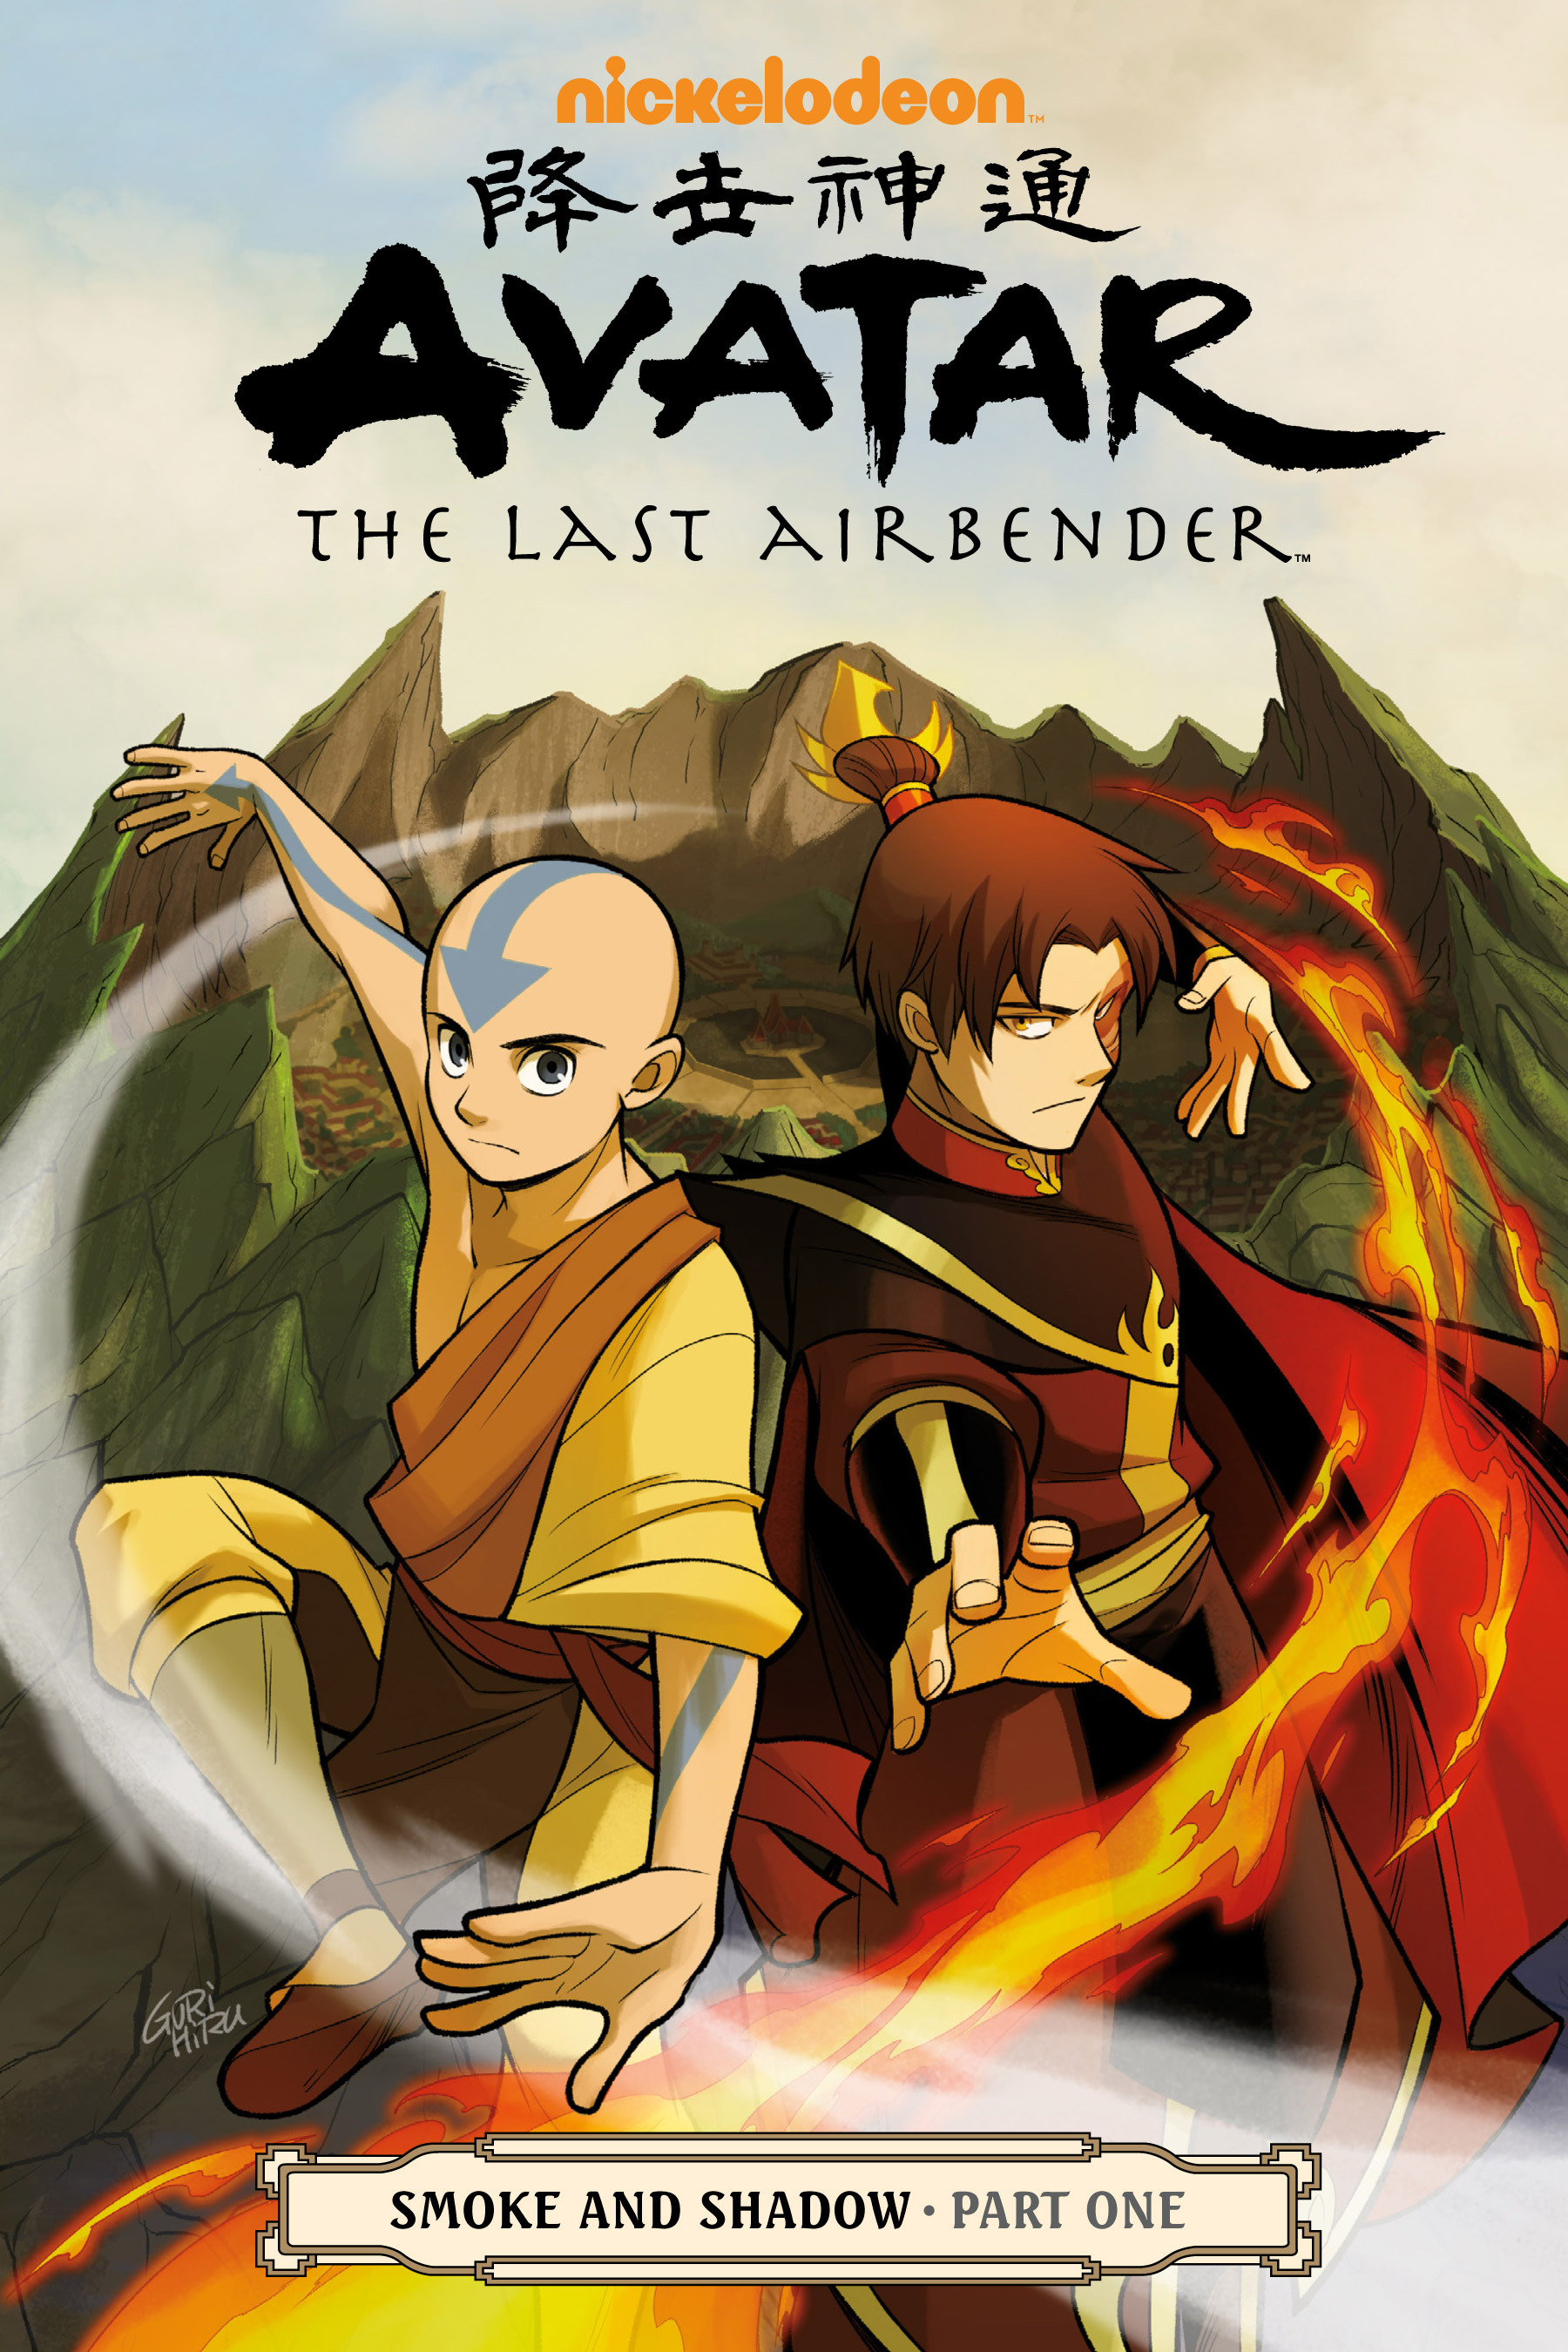 Read online Nickelodeon Avatar: The Last Airbender - Smoke and Shadow comic -  Issue # Part 1 - 1